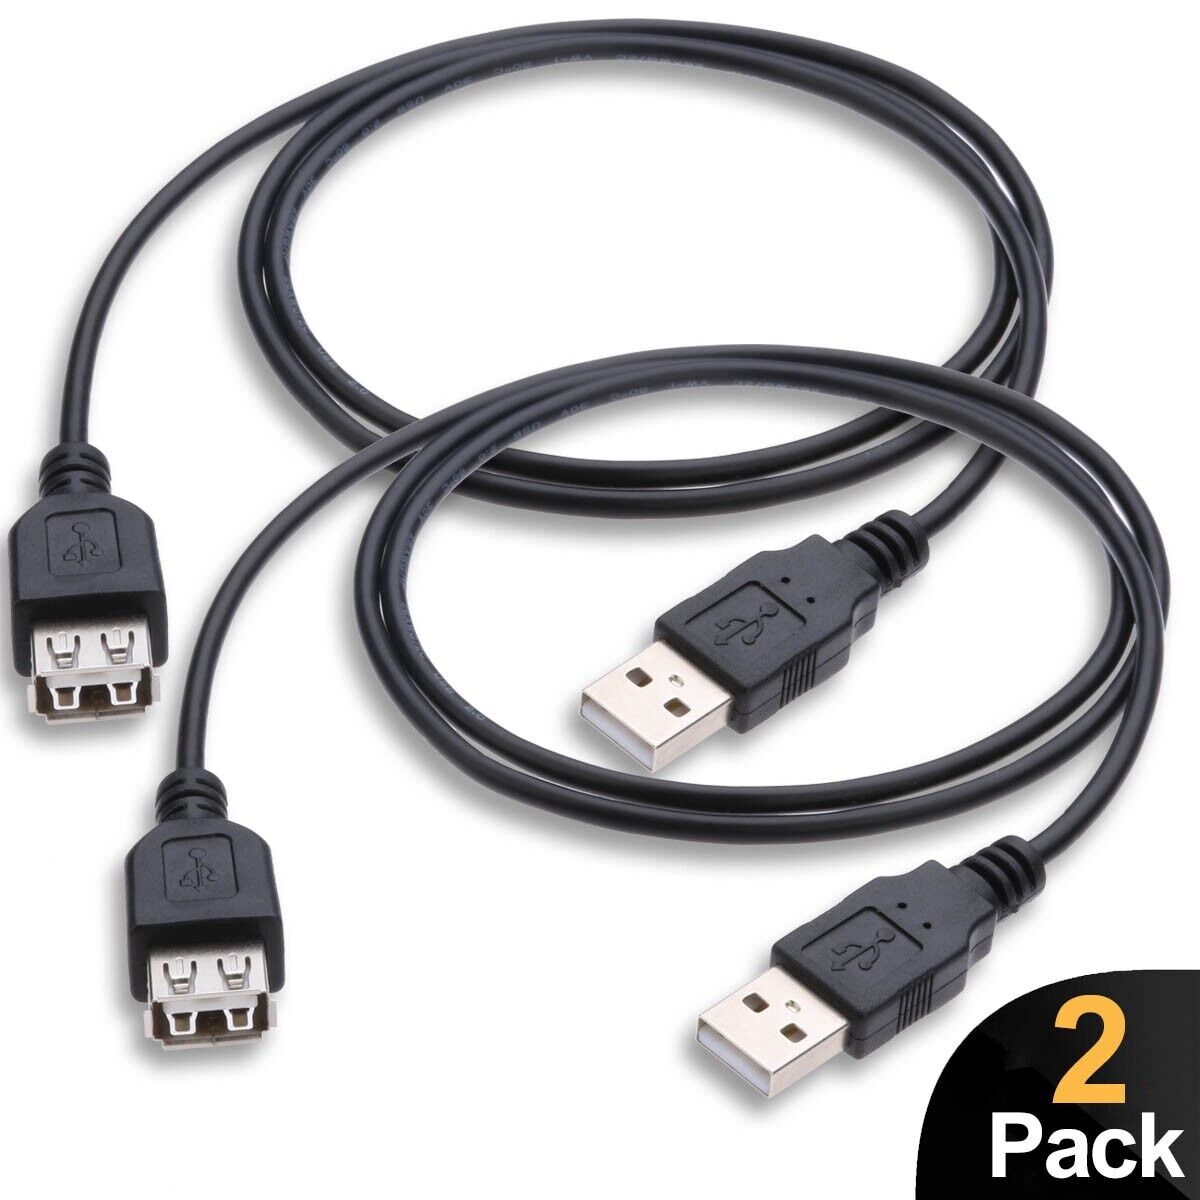 2X3FT USB 2.0 A Male to A Female Extension Cable Cord Extender For PC or Laptop